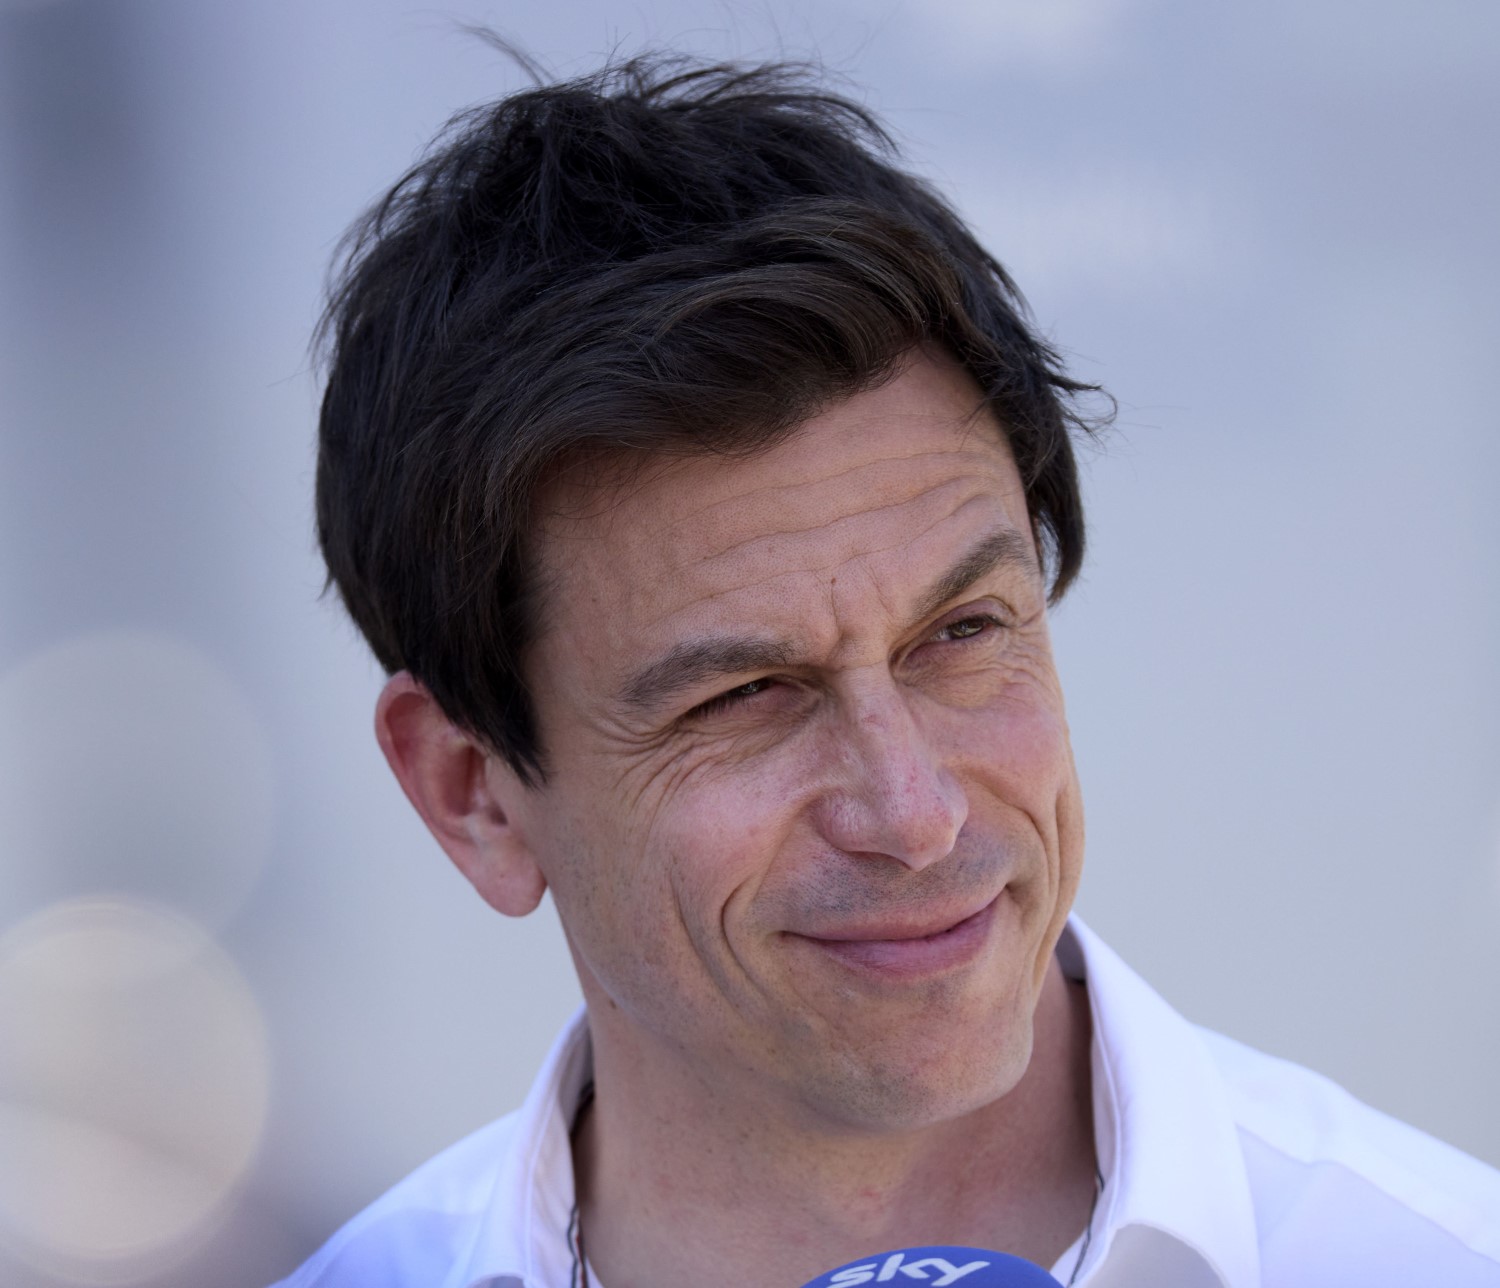 Mercedes F1 Team Boss Toto Wolff. Photo courtesy of Mercedes